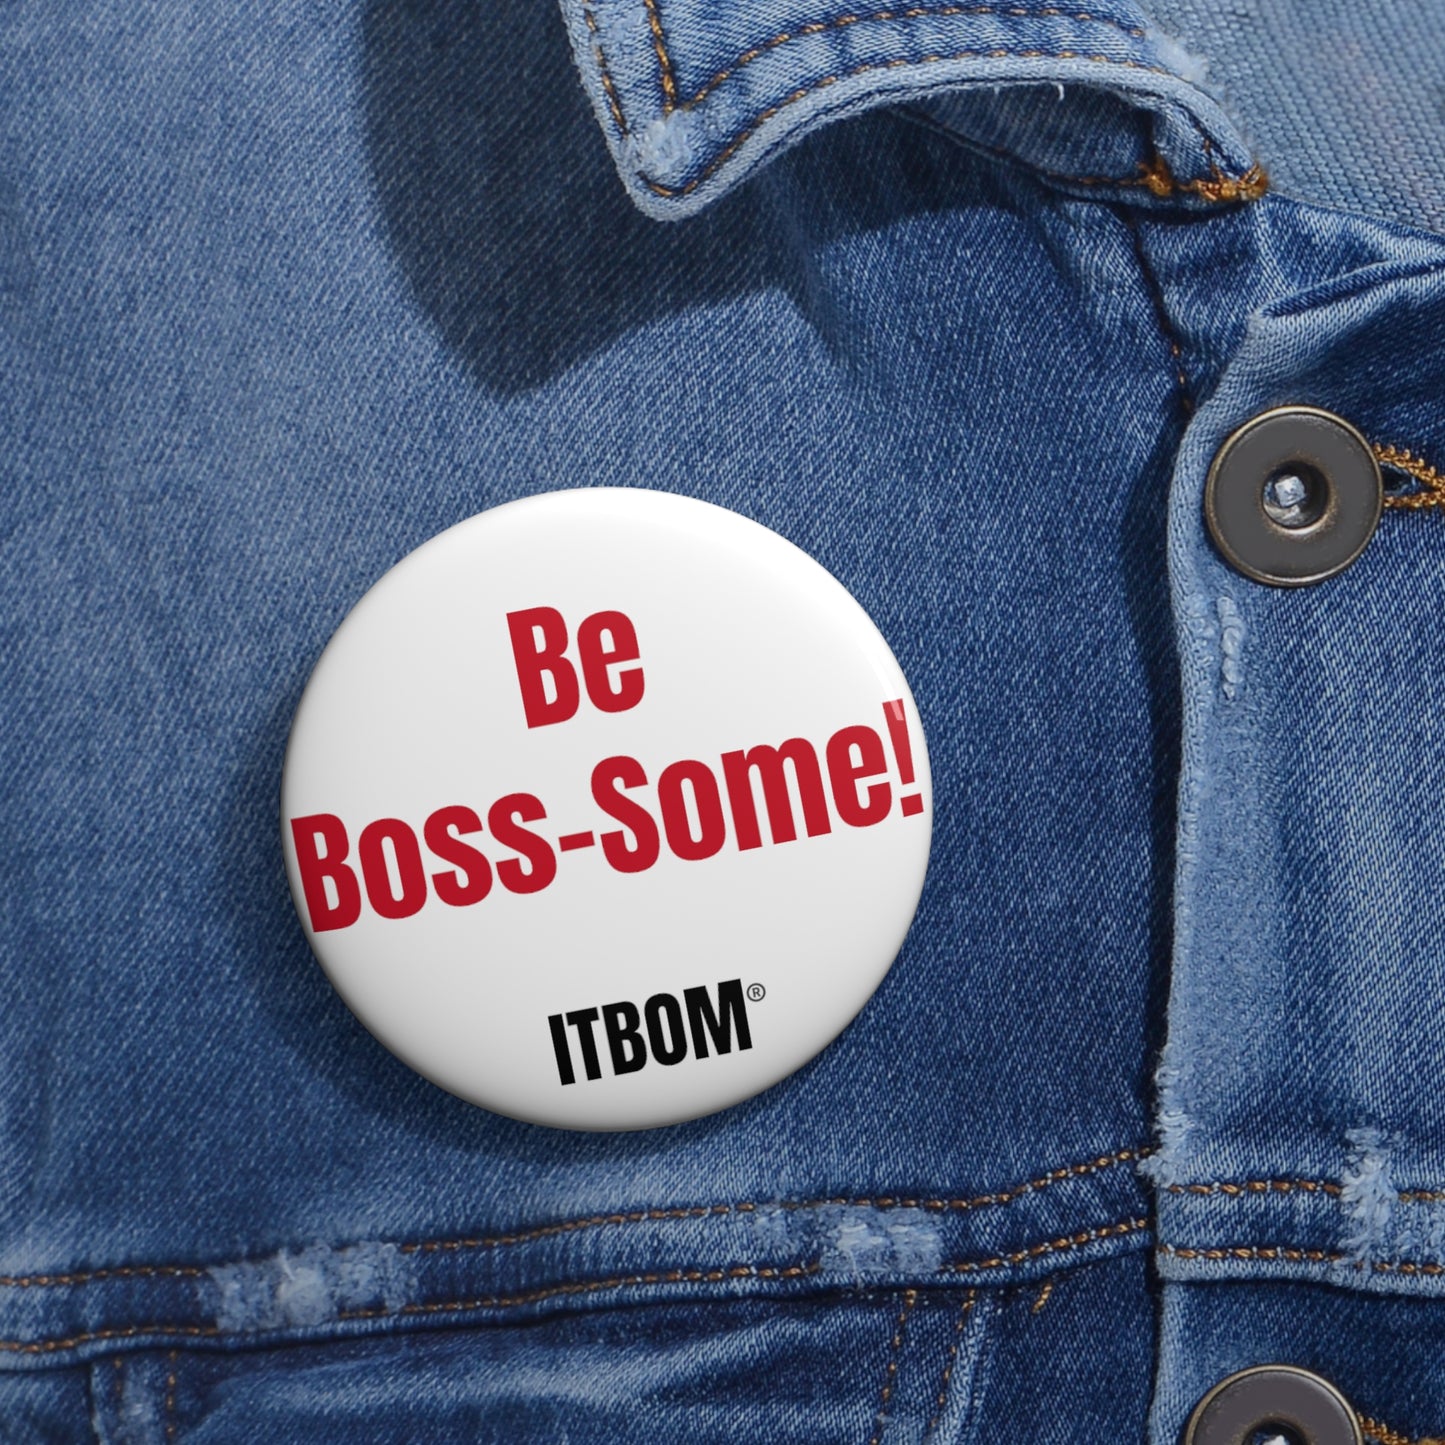 BE BOSS-SOME!!! Custom Pin Buttons